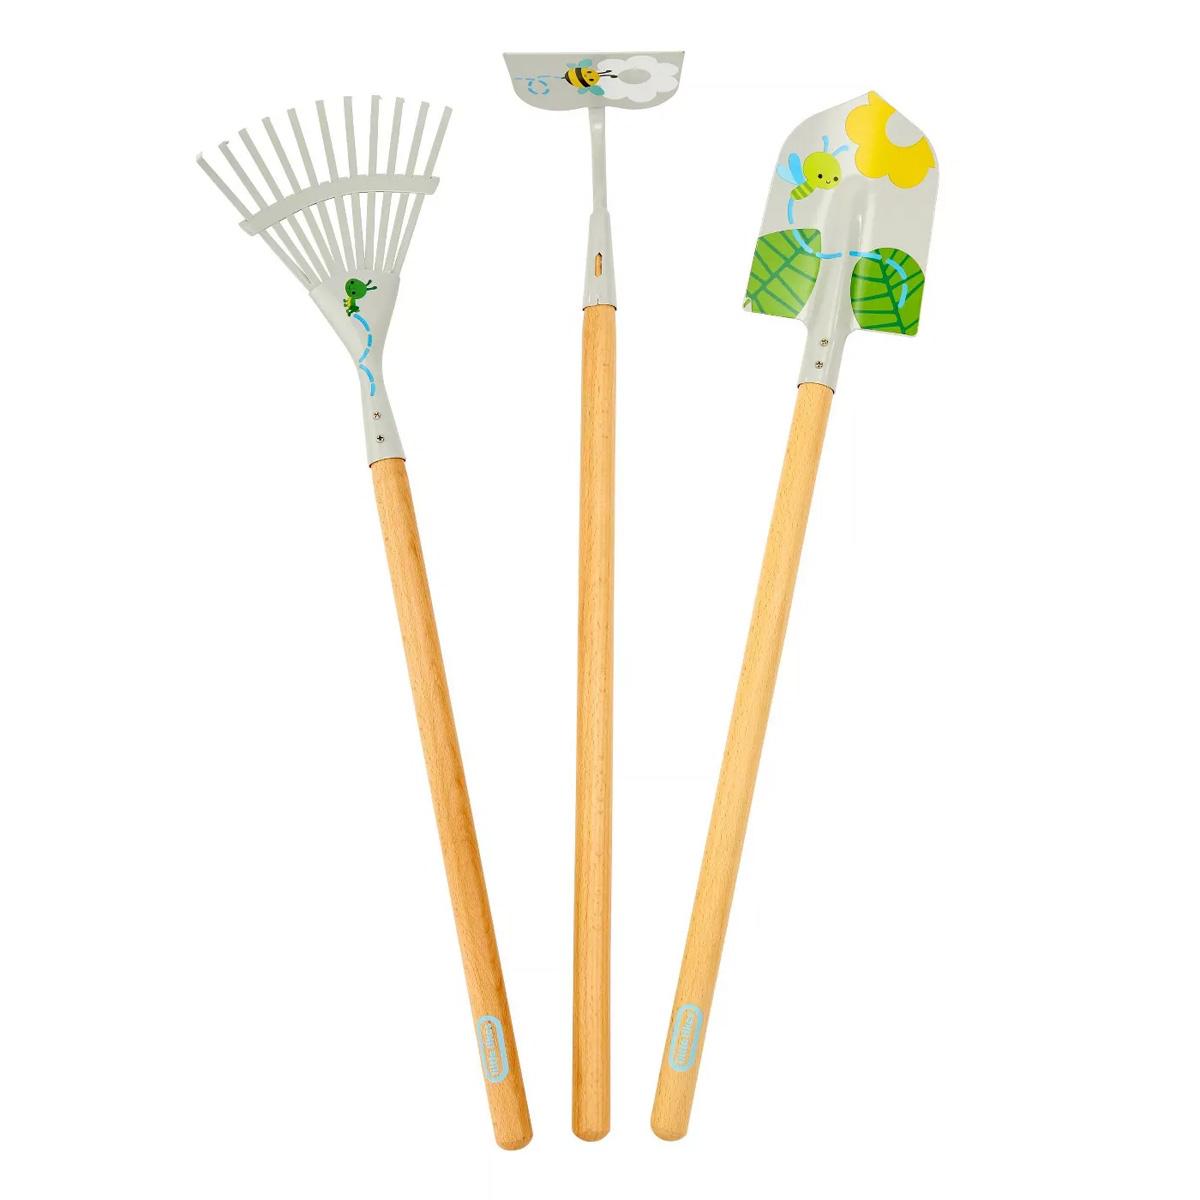 Little Tikes Growing Garden Large Tool Set for $12.49